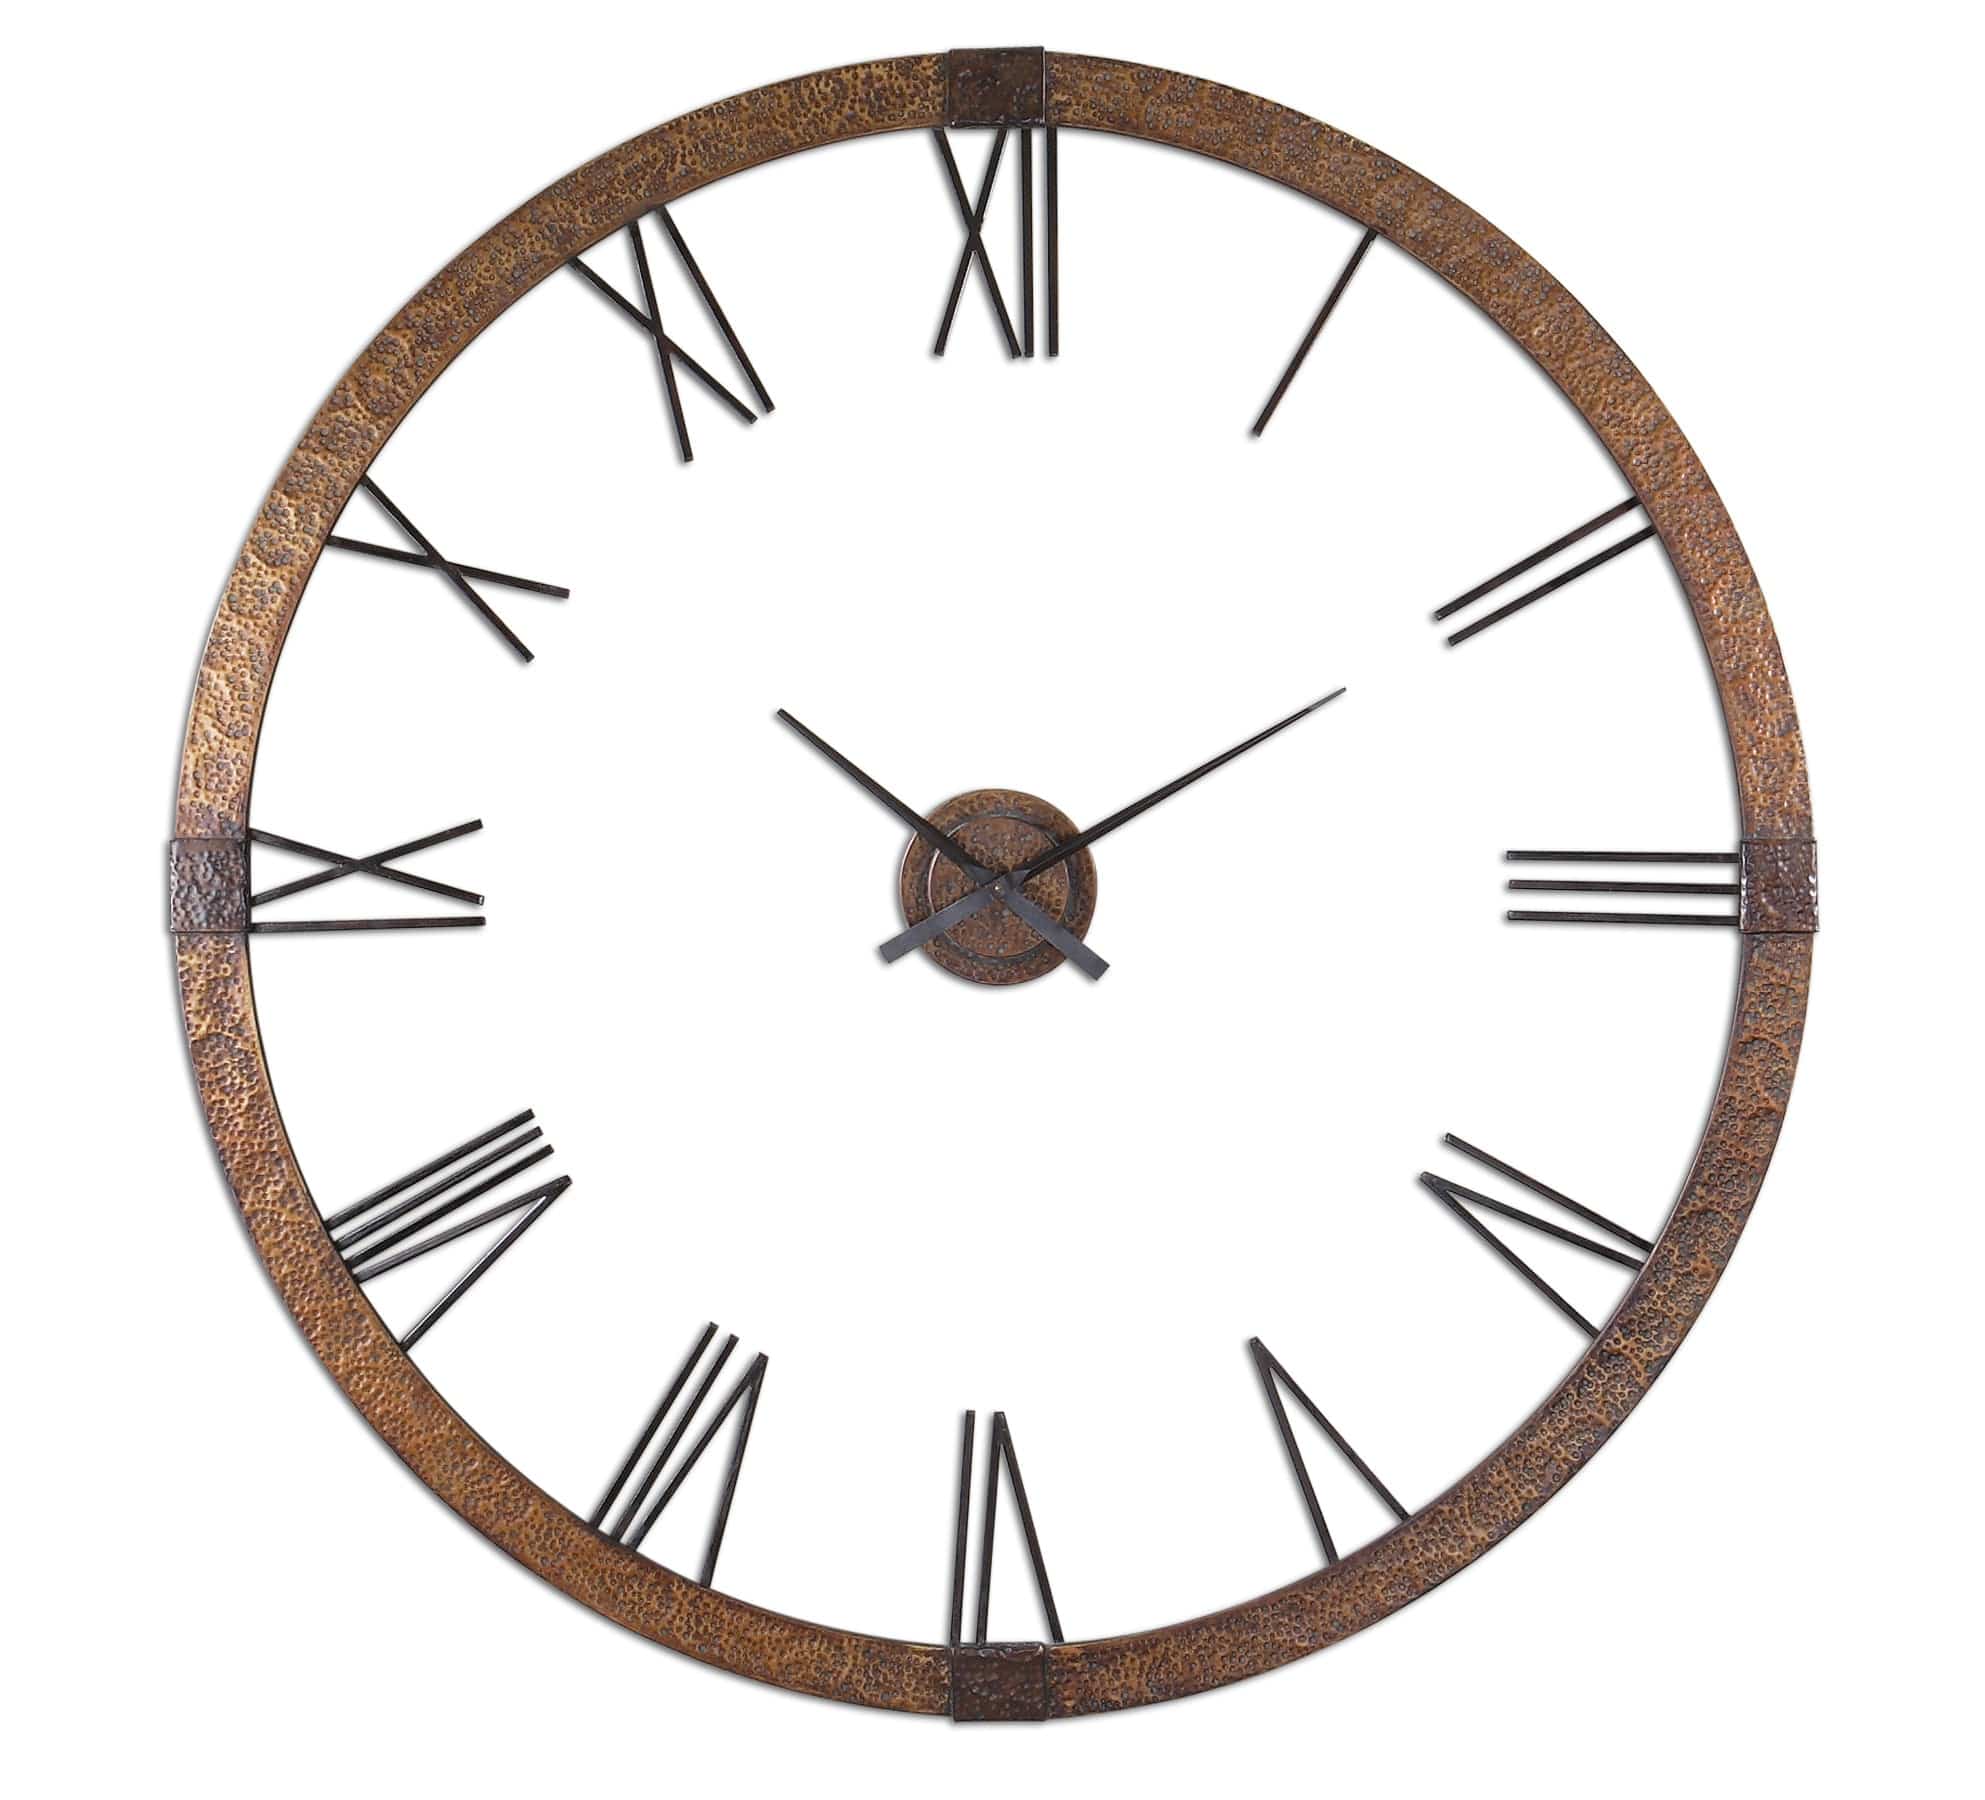 Amarion 60" Copper Wall Clock Uttermost